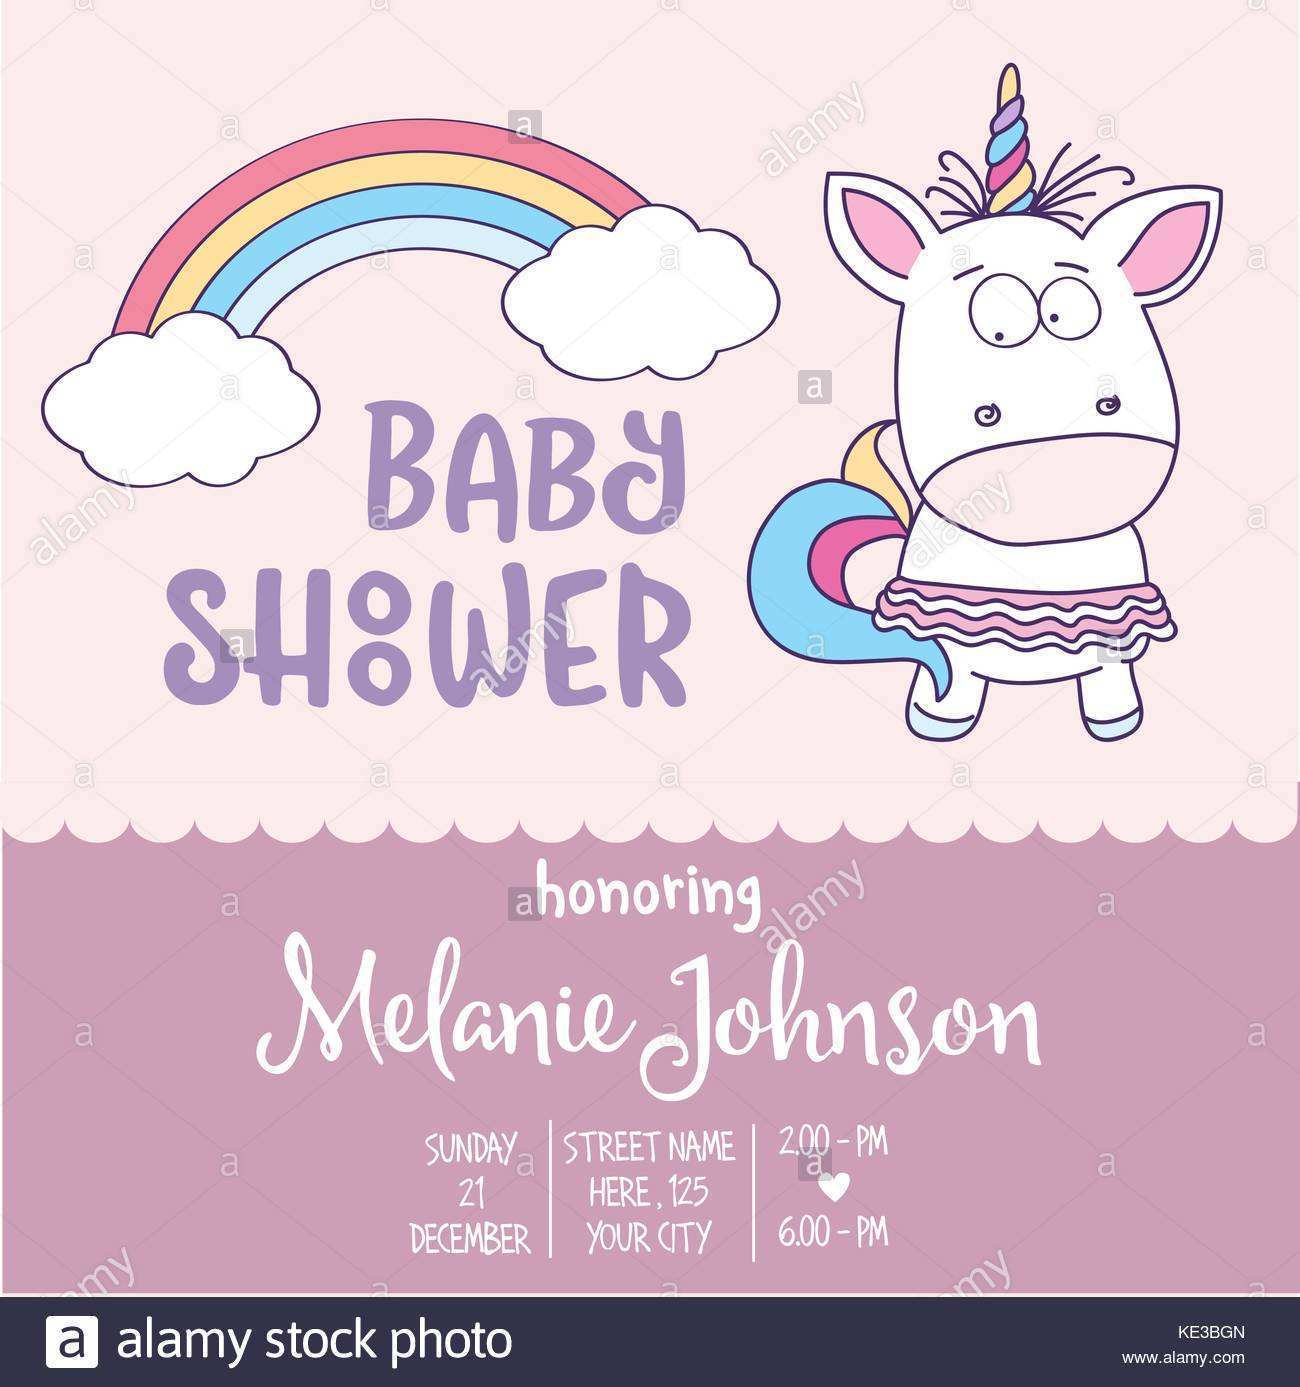 35 The Best Baby Shower Name Card Template PSD File by Baby Shower Name Card Template